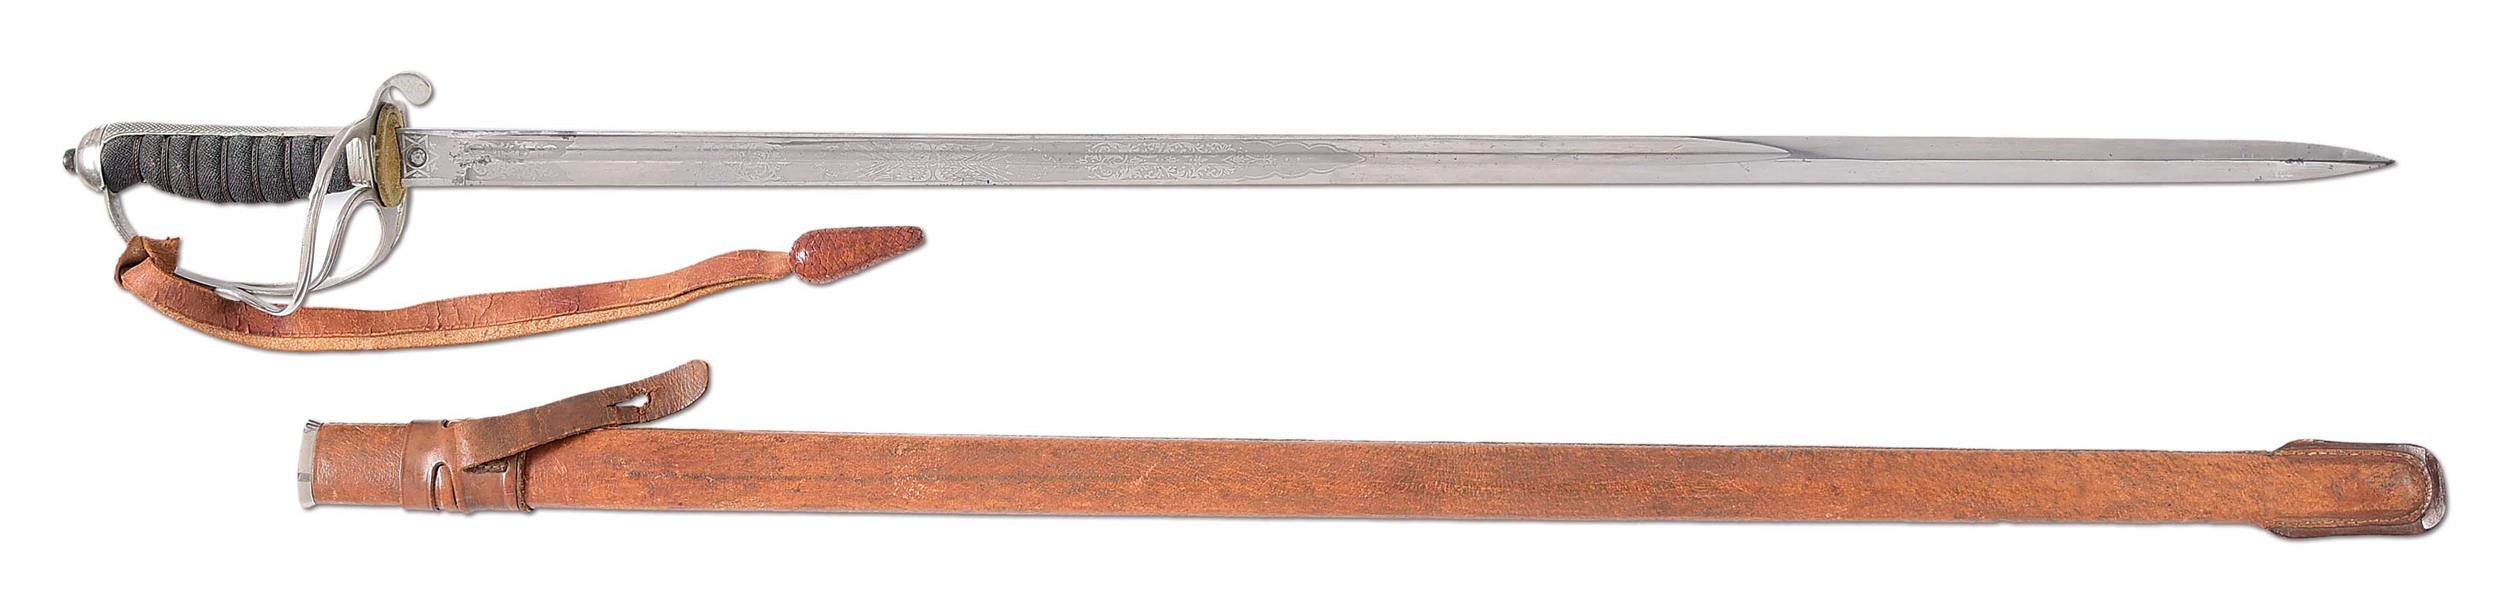 BRITISH WWI PATTERN 1821 ROYAL ARTILLERY SWORD OF AUBREY FRANCIS TOWNSEND, TRENCH MORTAR OFFICER. 